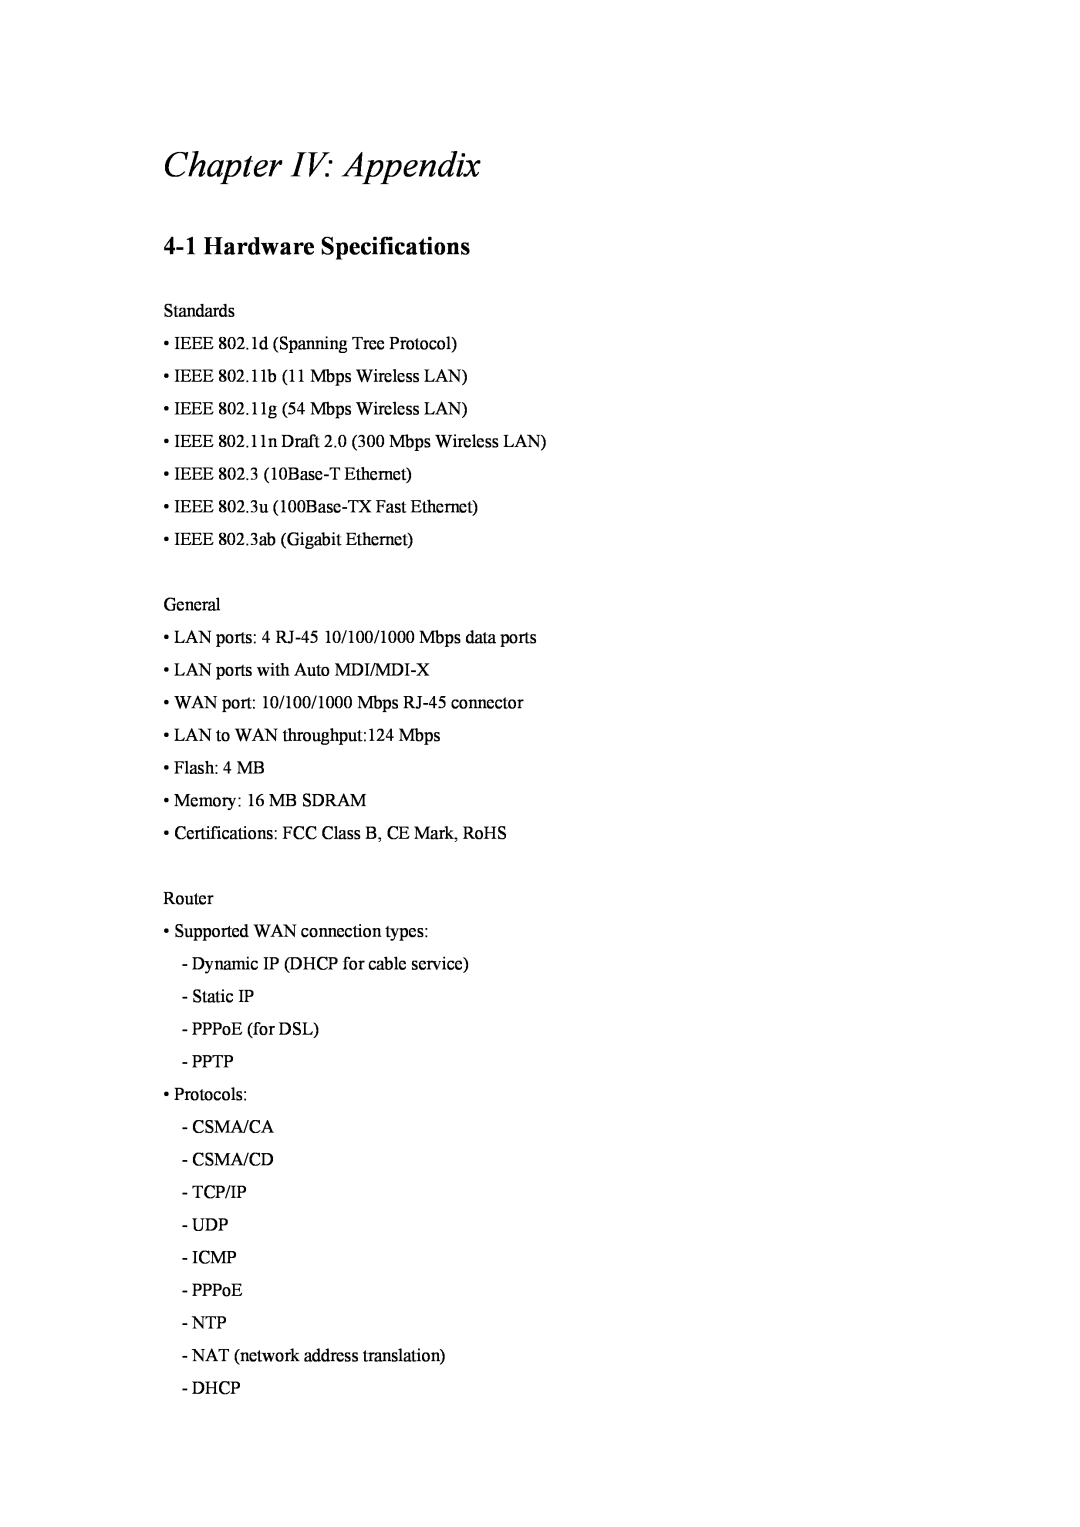 Intellinet Network Solutions INT-524315-UM-0808-1 user manual Chapter IV Appendix, Hardware Specifications 